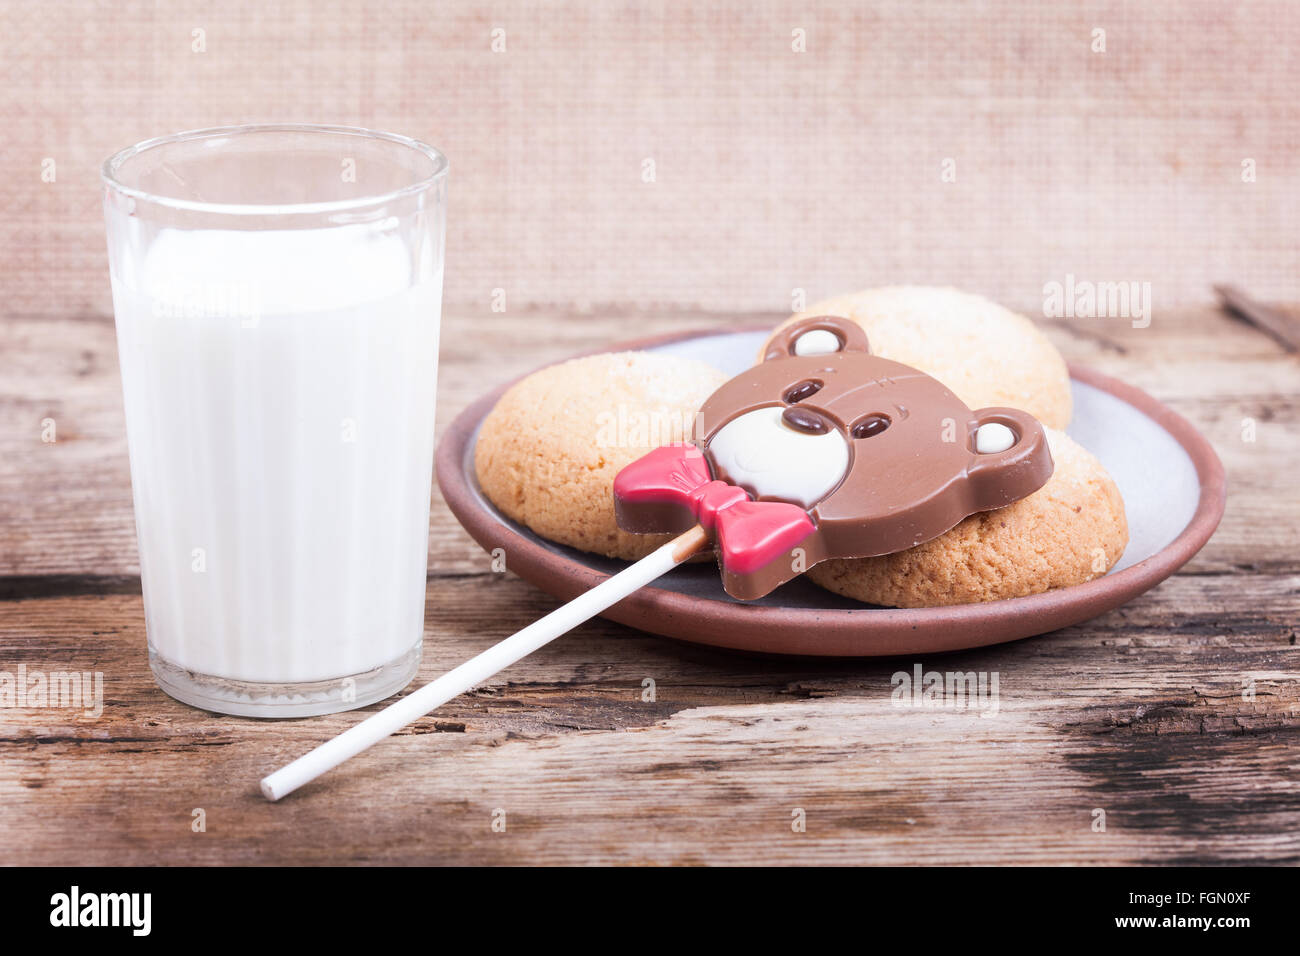 Chocolate sweet, chip cookies, milk on rustic wood background Stock Photo